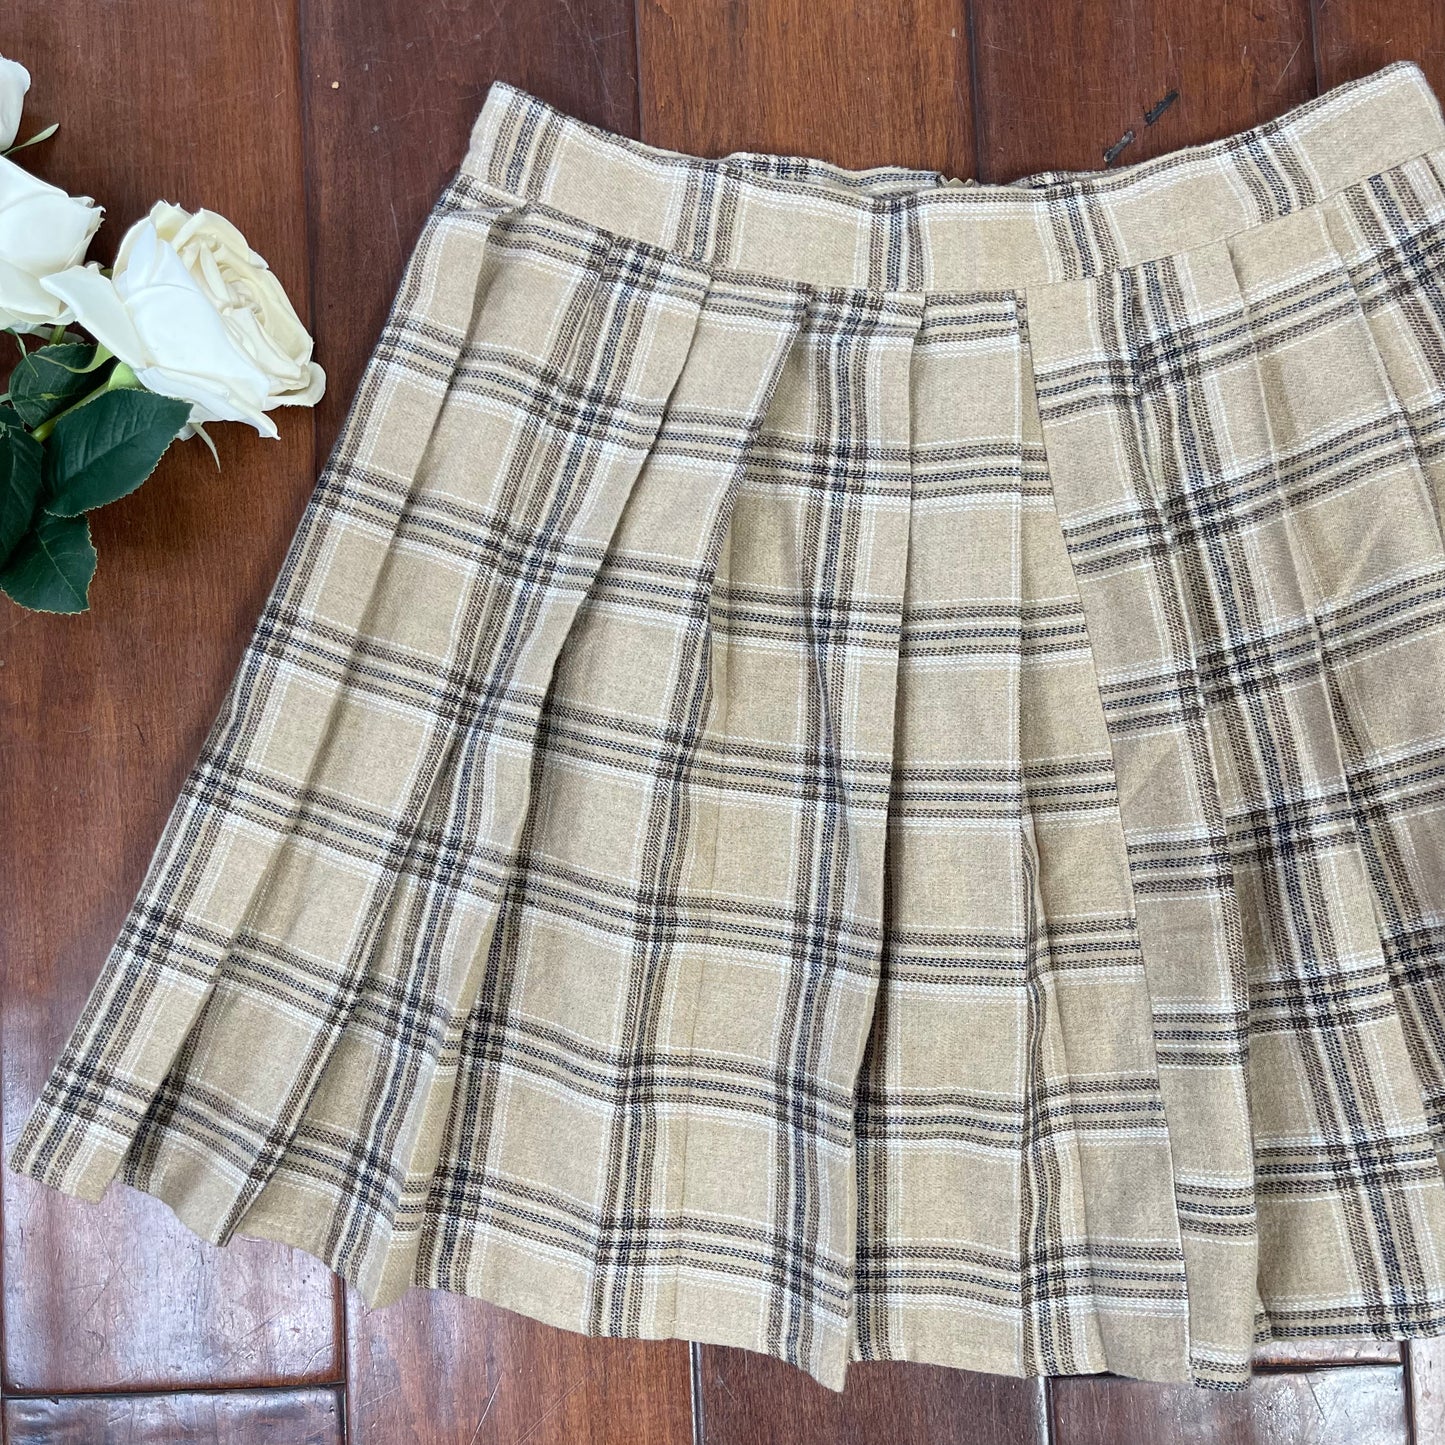 THRIFTED PLEATED SKIRT